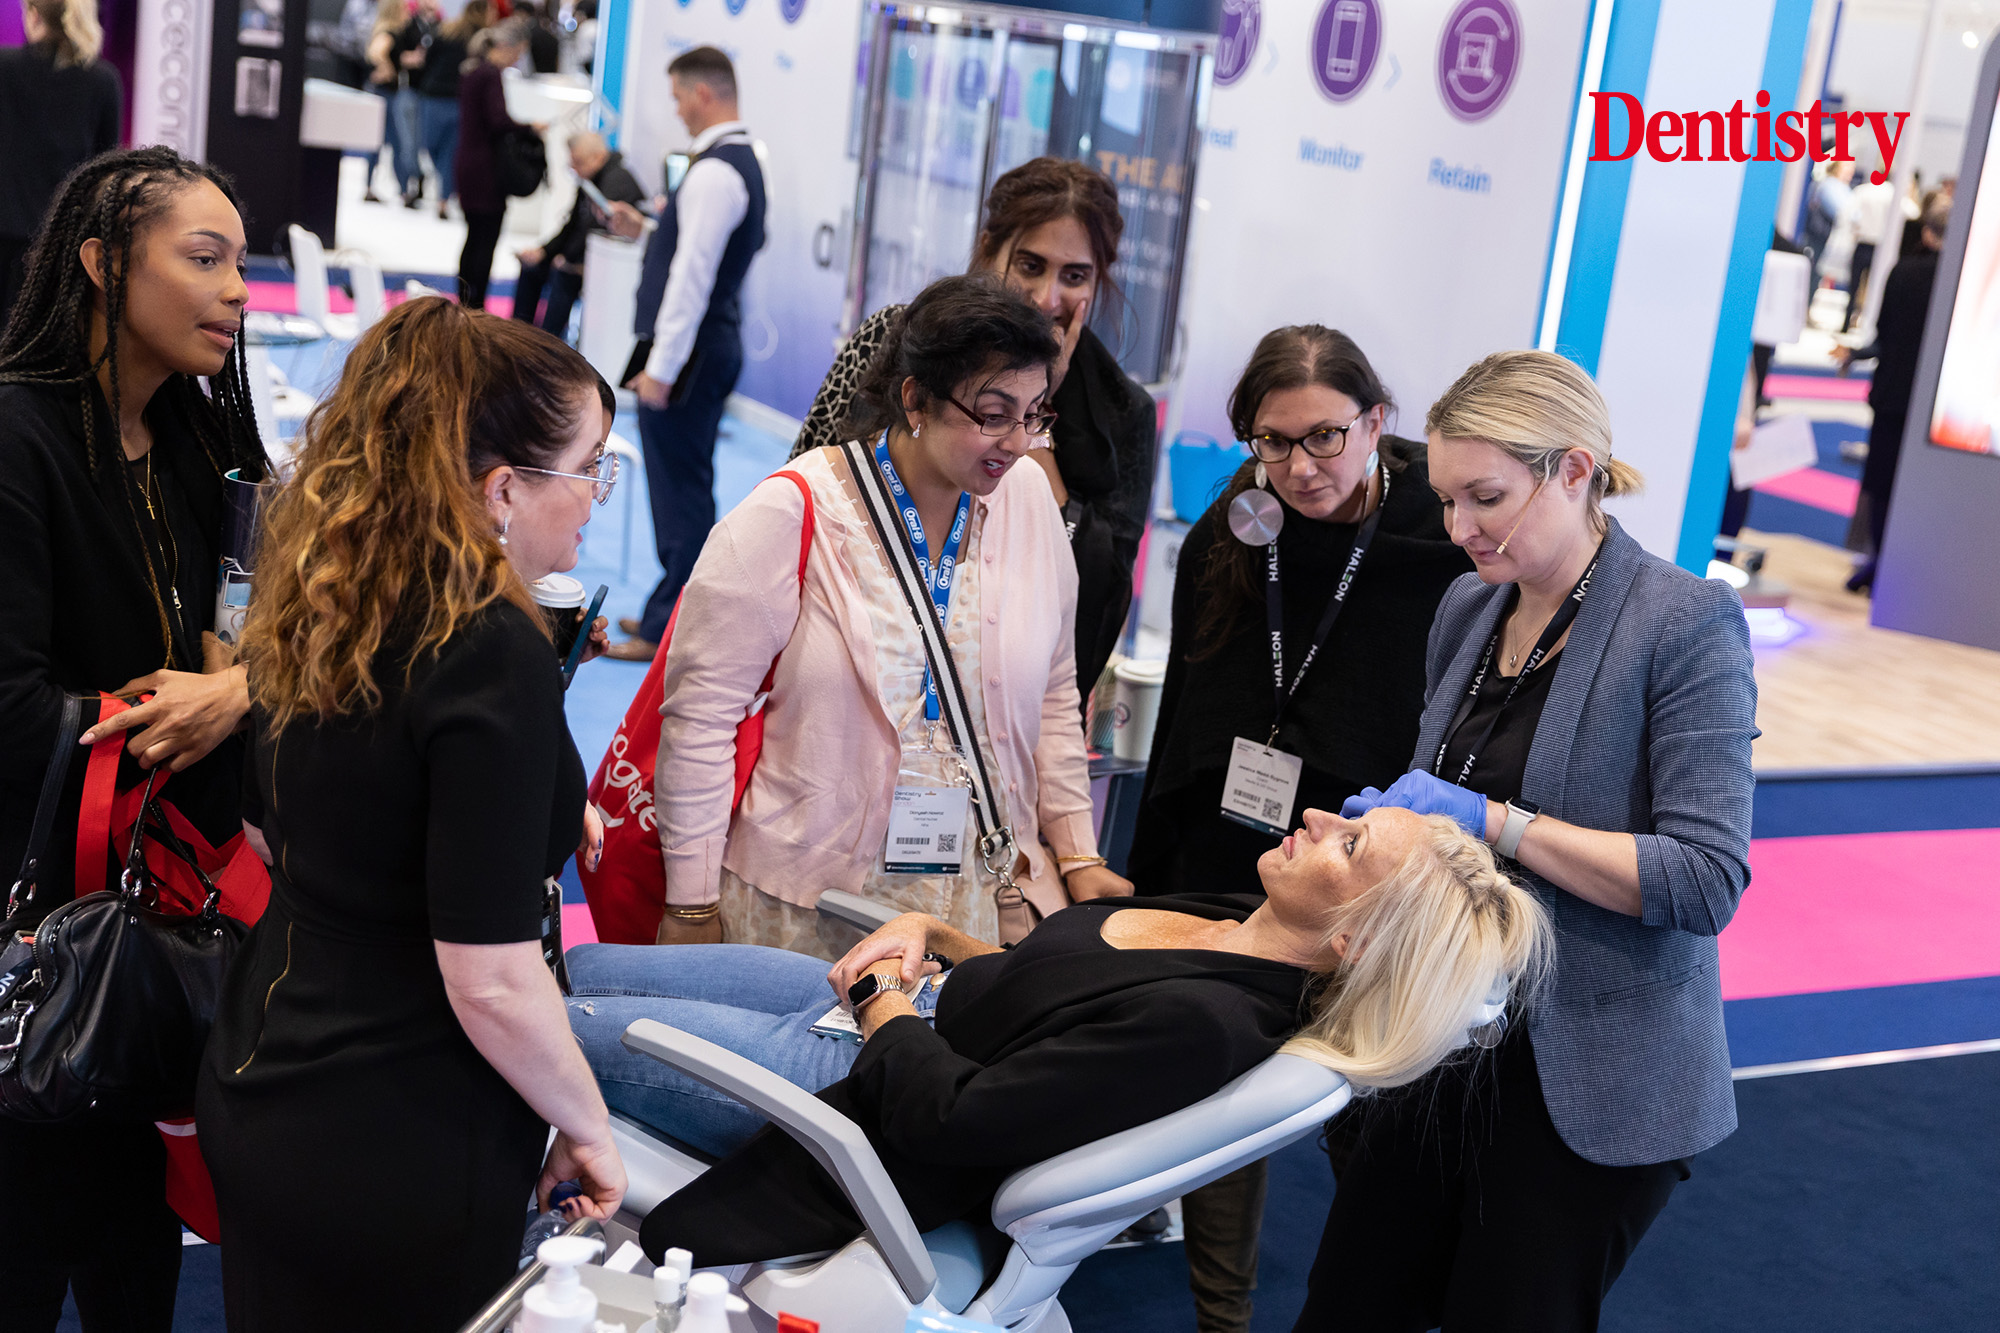 The Dentistry Show London took place on 7-8 October. Tamara Milanovic reports back on how to make the most of dental exhibitions as a newcomer.